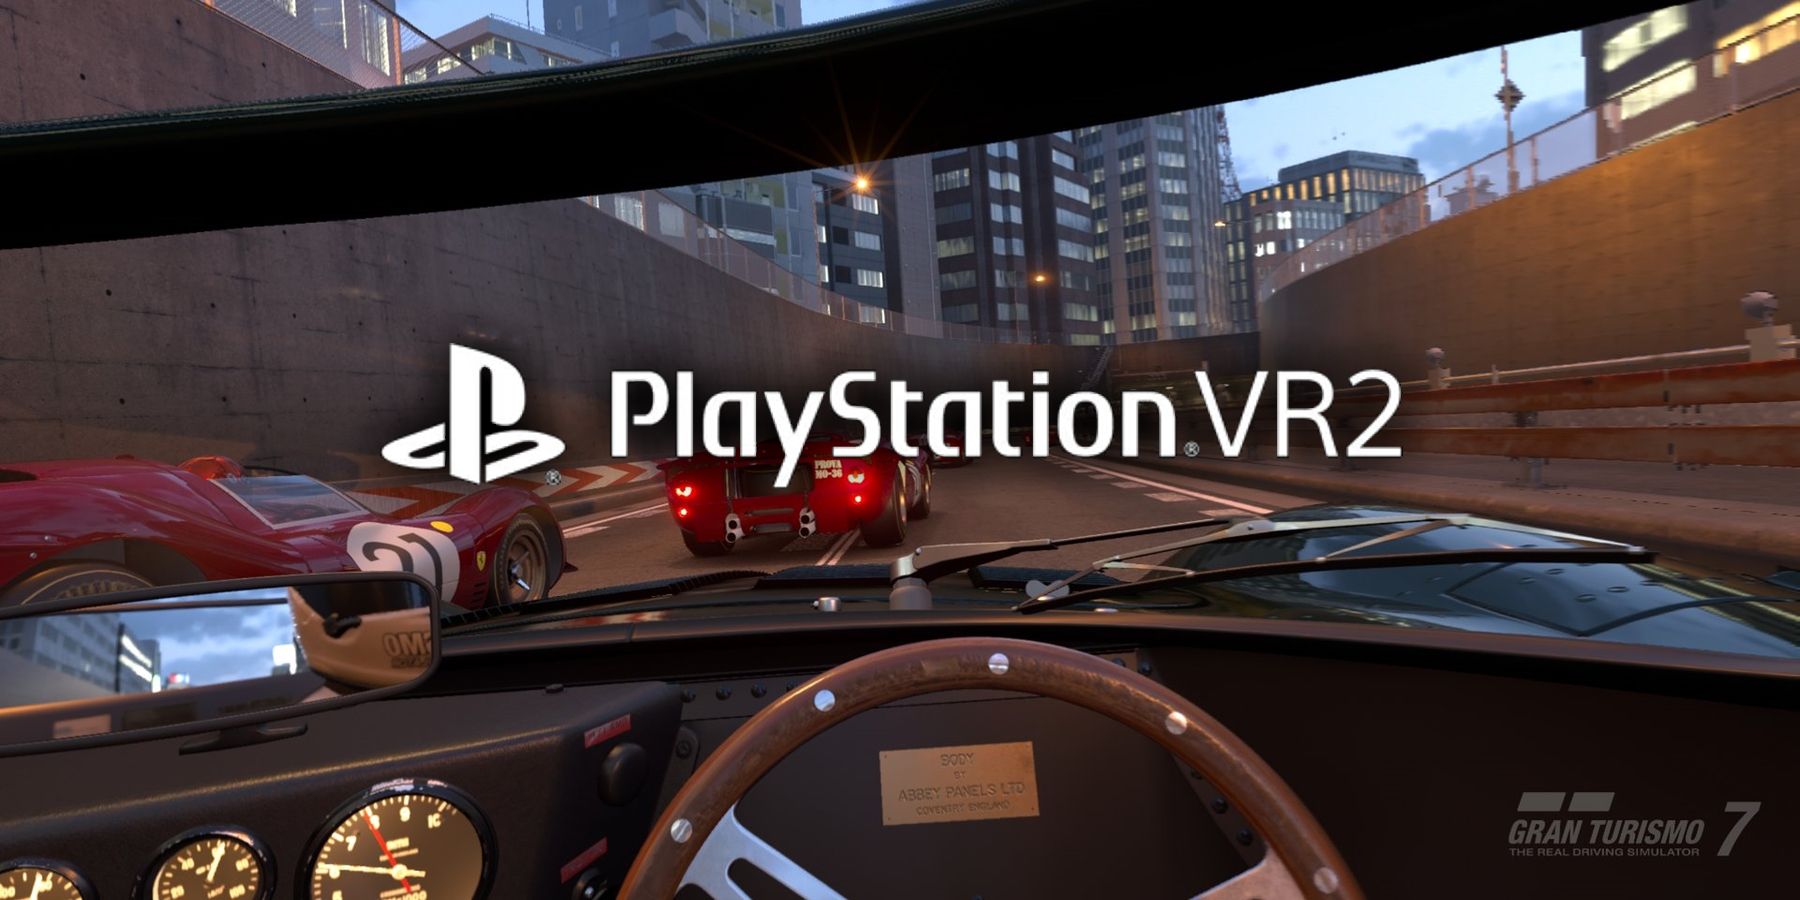 Screenshot from the PS VR2 release of Gran Turismo 7